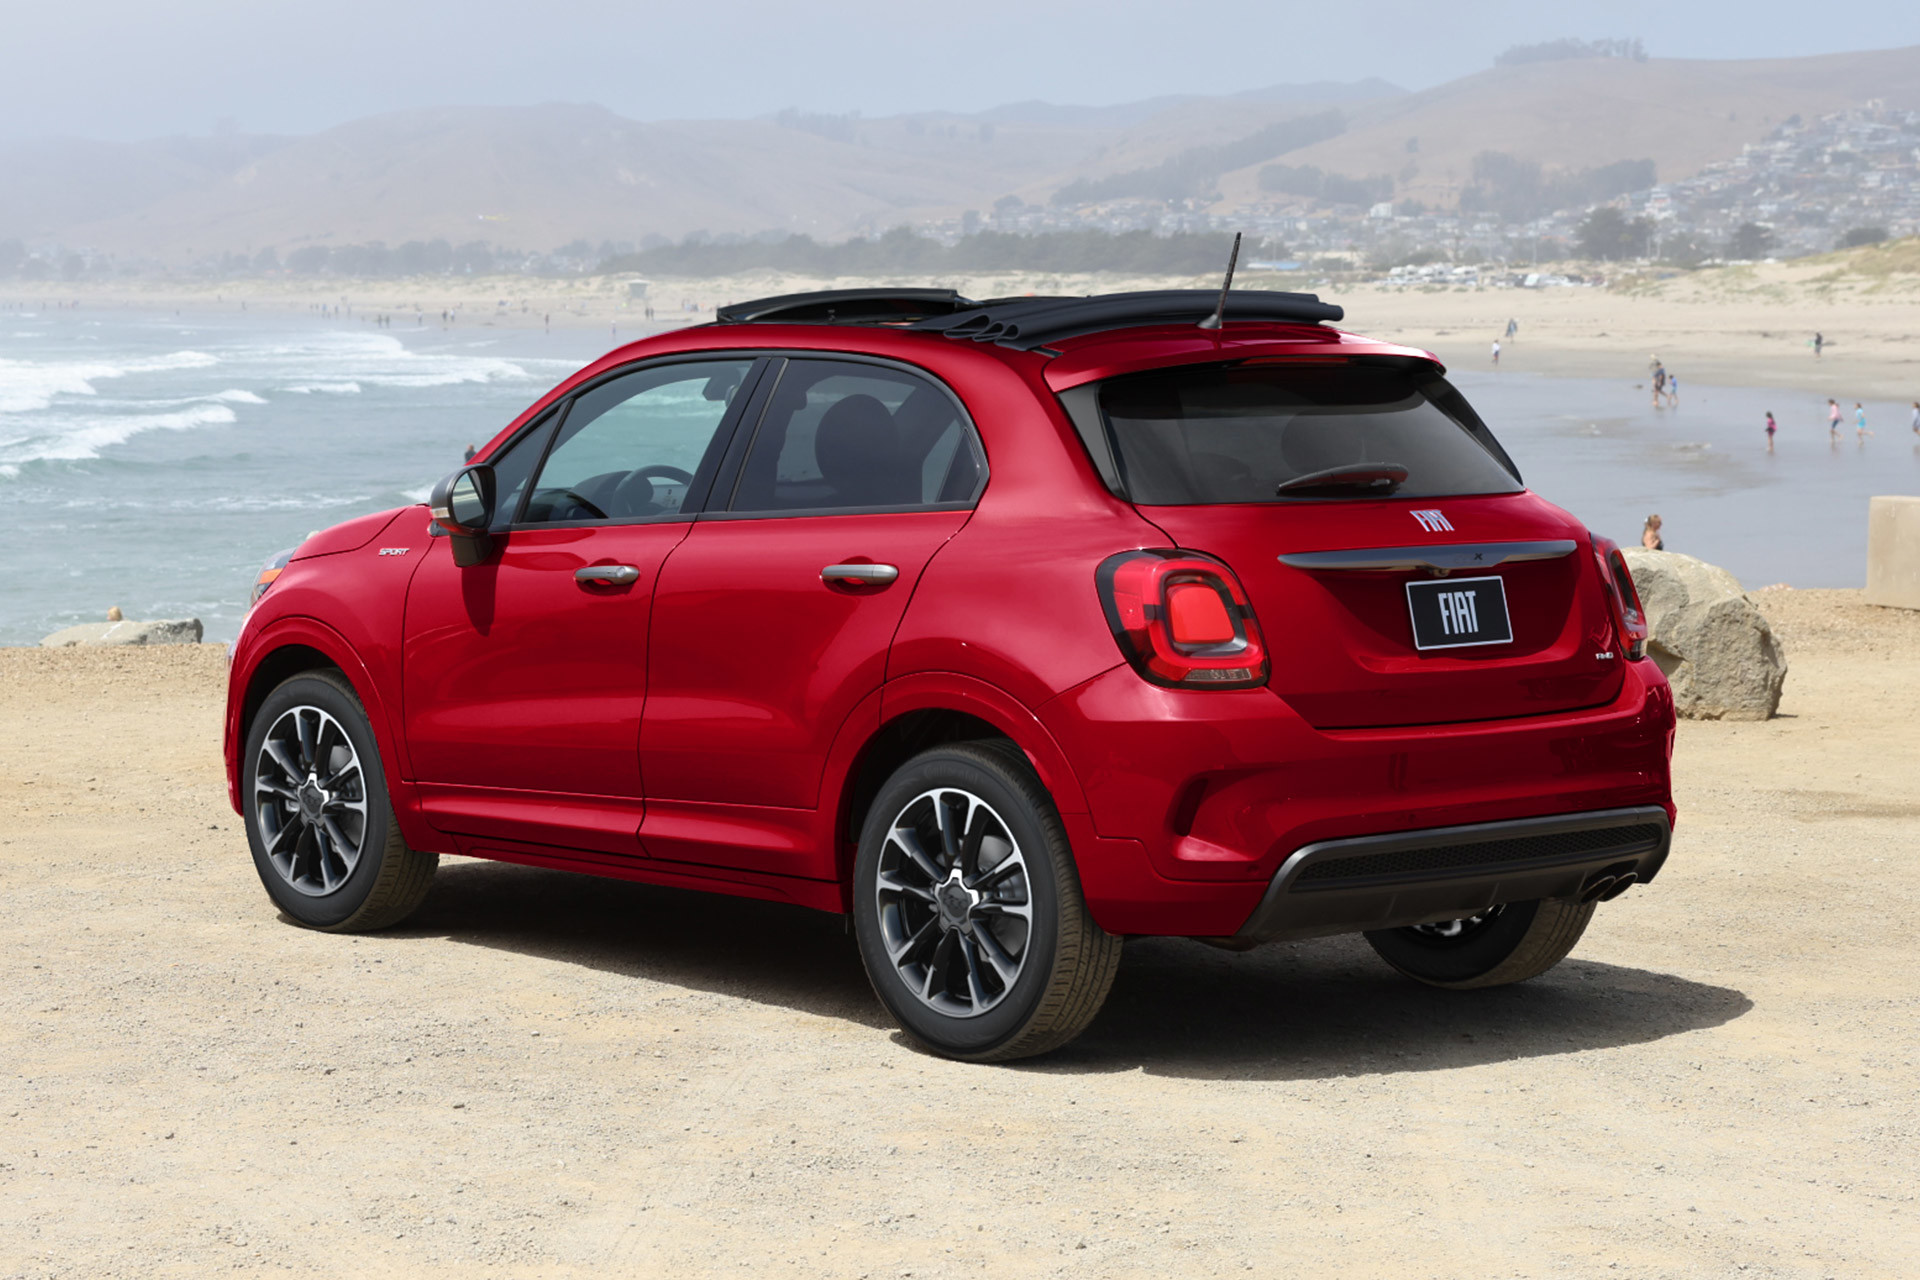 Profile view of a red 2023 Fiat 500X parked on a sandy path with a beach shown in the background.